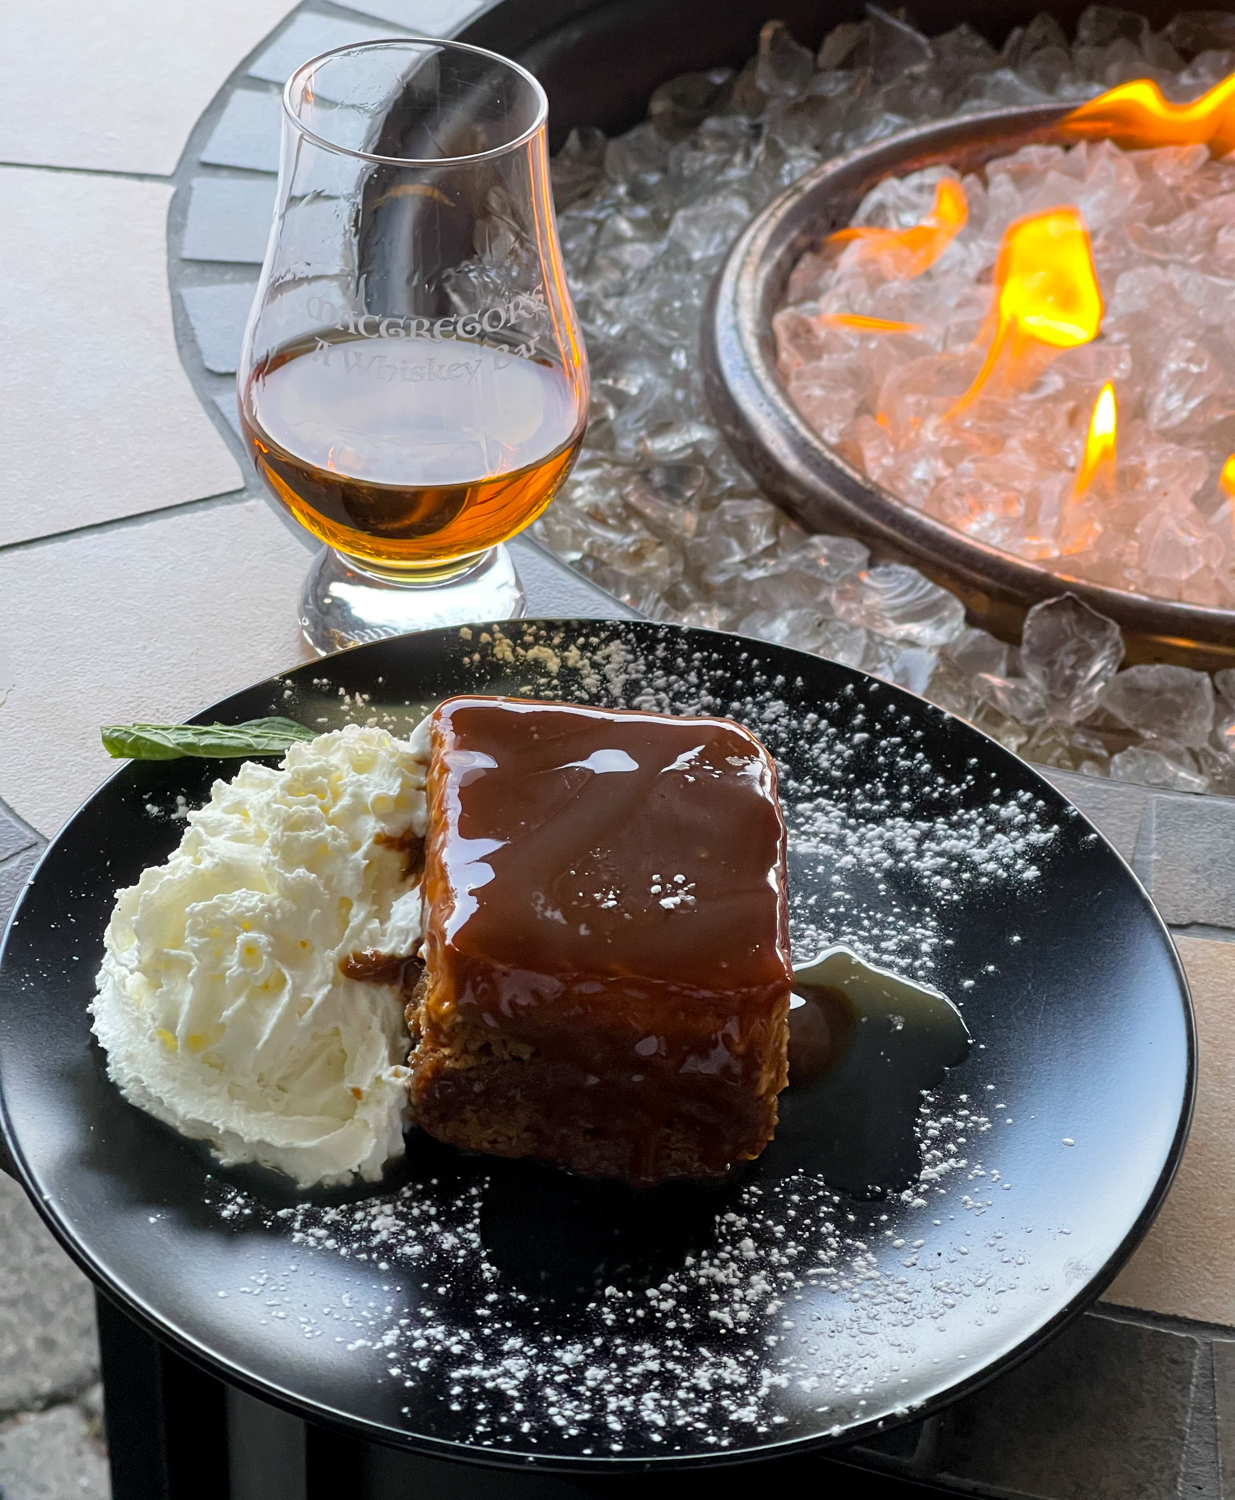 MacGregor’s Sticky Toffee Cake – An Oregon Coast Culinary Gem You Don’t Want to Miss! By Steven Shomler